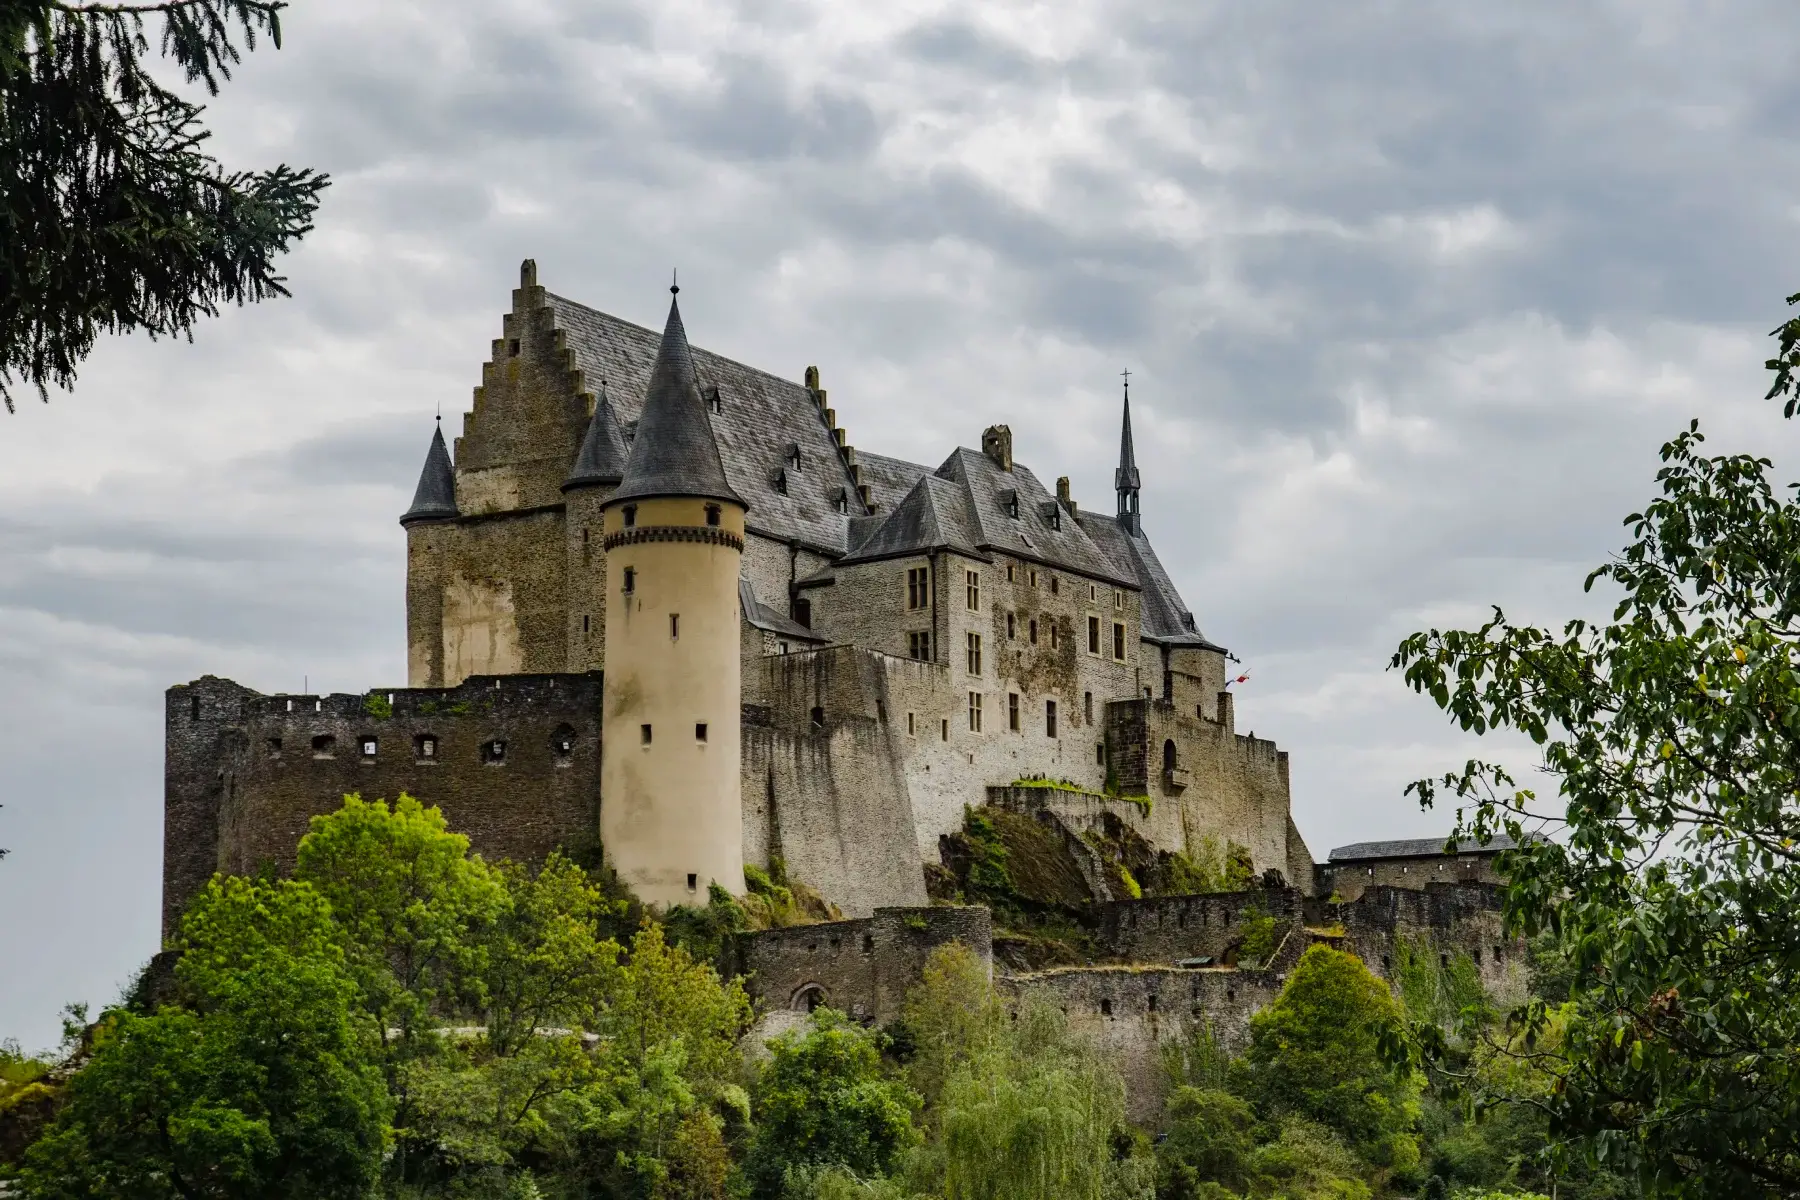 Vianden Castle on the hill, a popular wedding location in Luxembourg